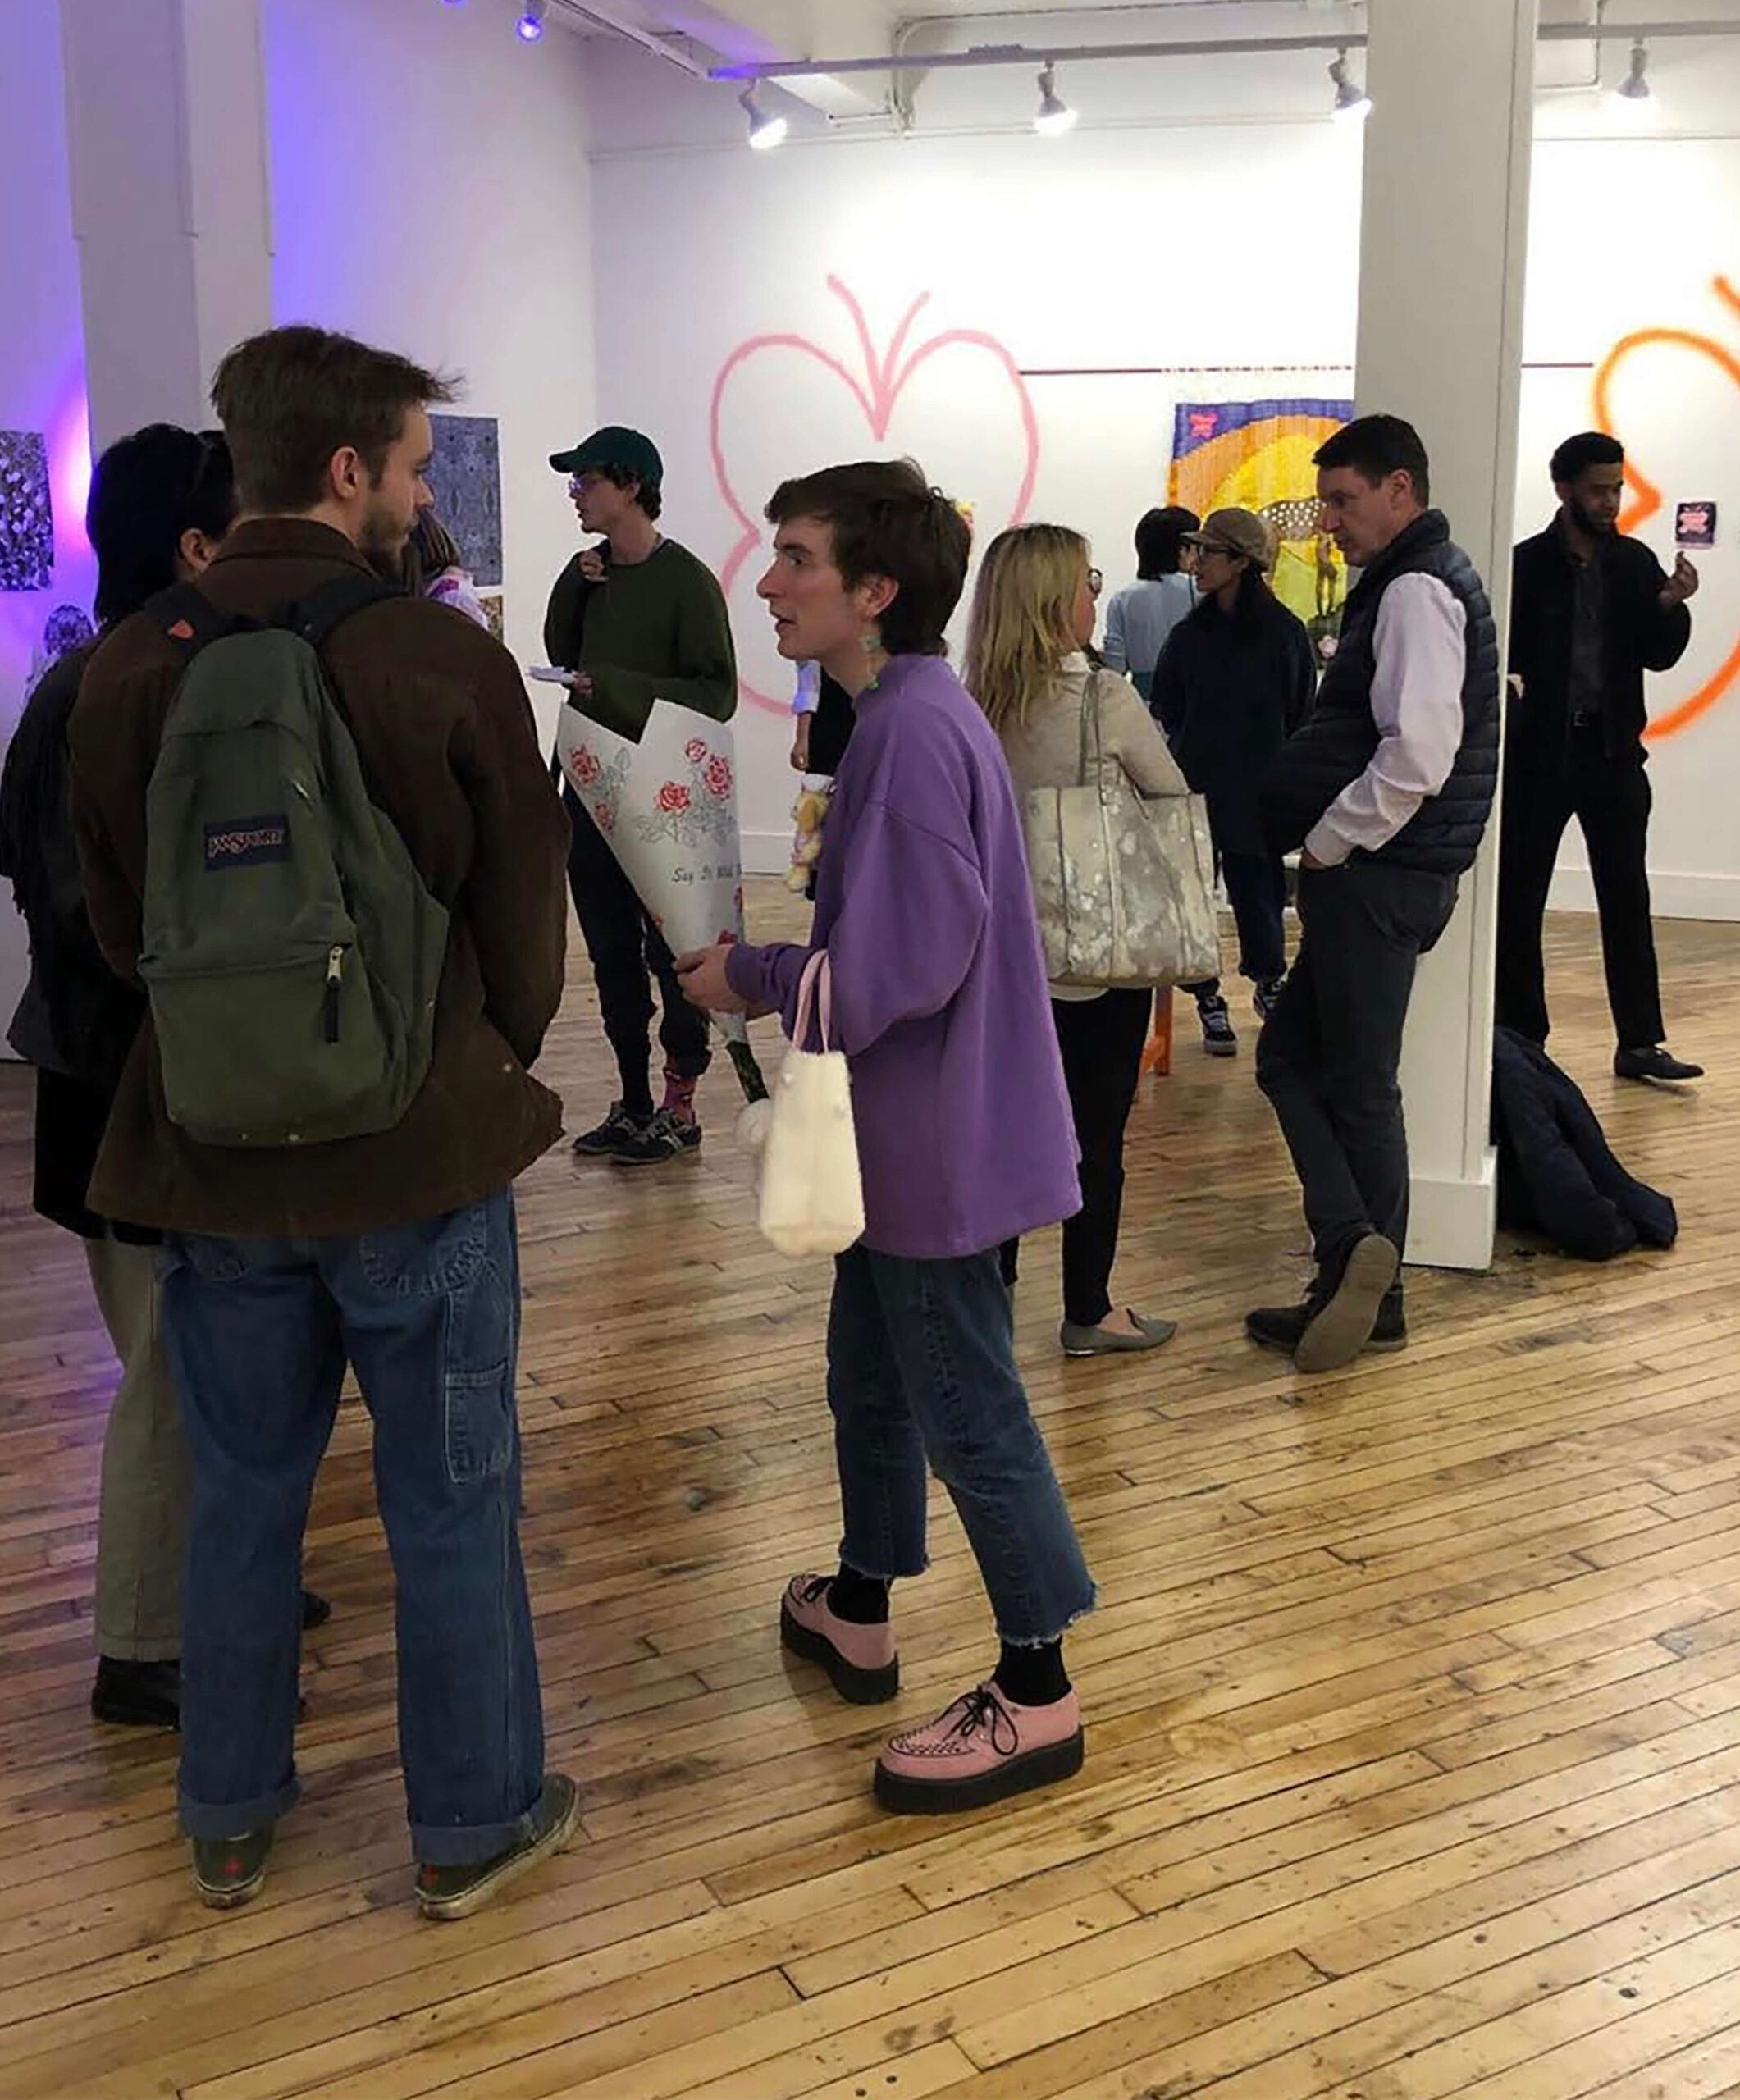 A large group of people chat amidst a large gallery with white walls, wooden floors and art displayed throughout.